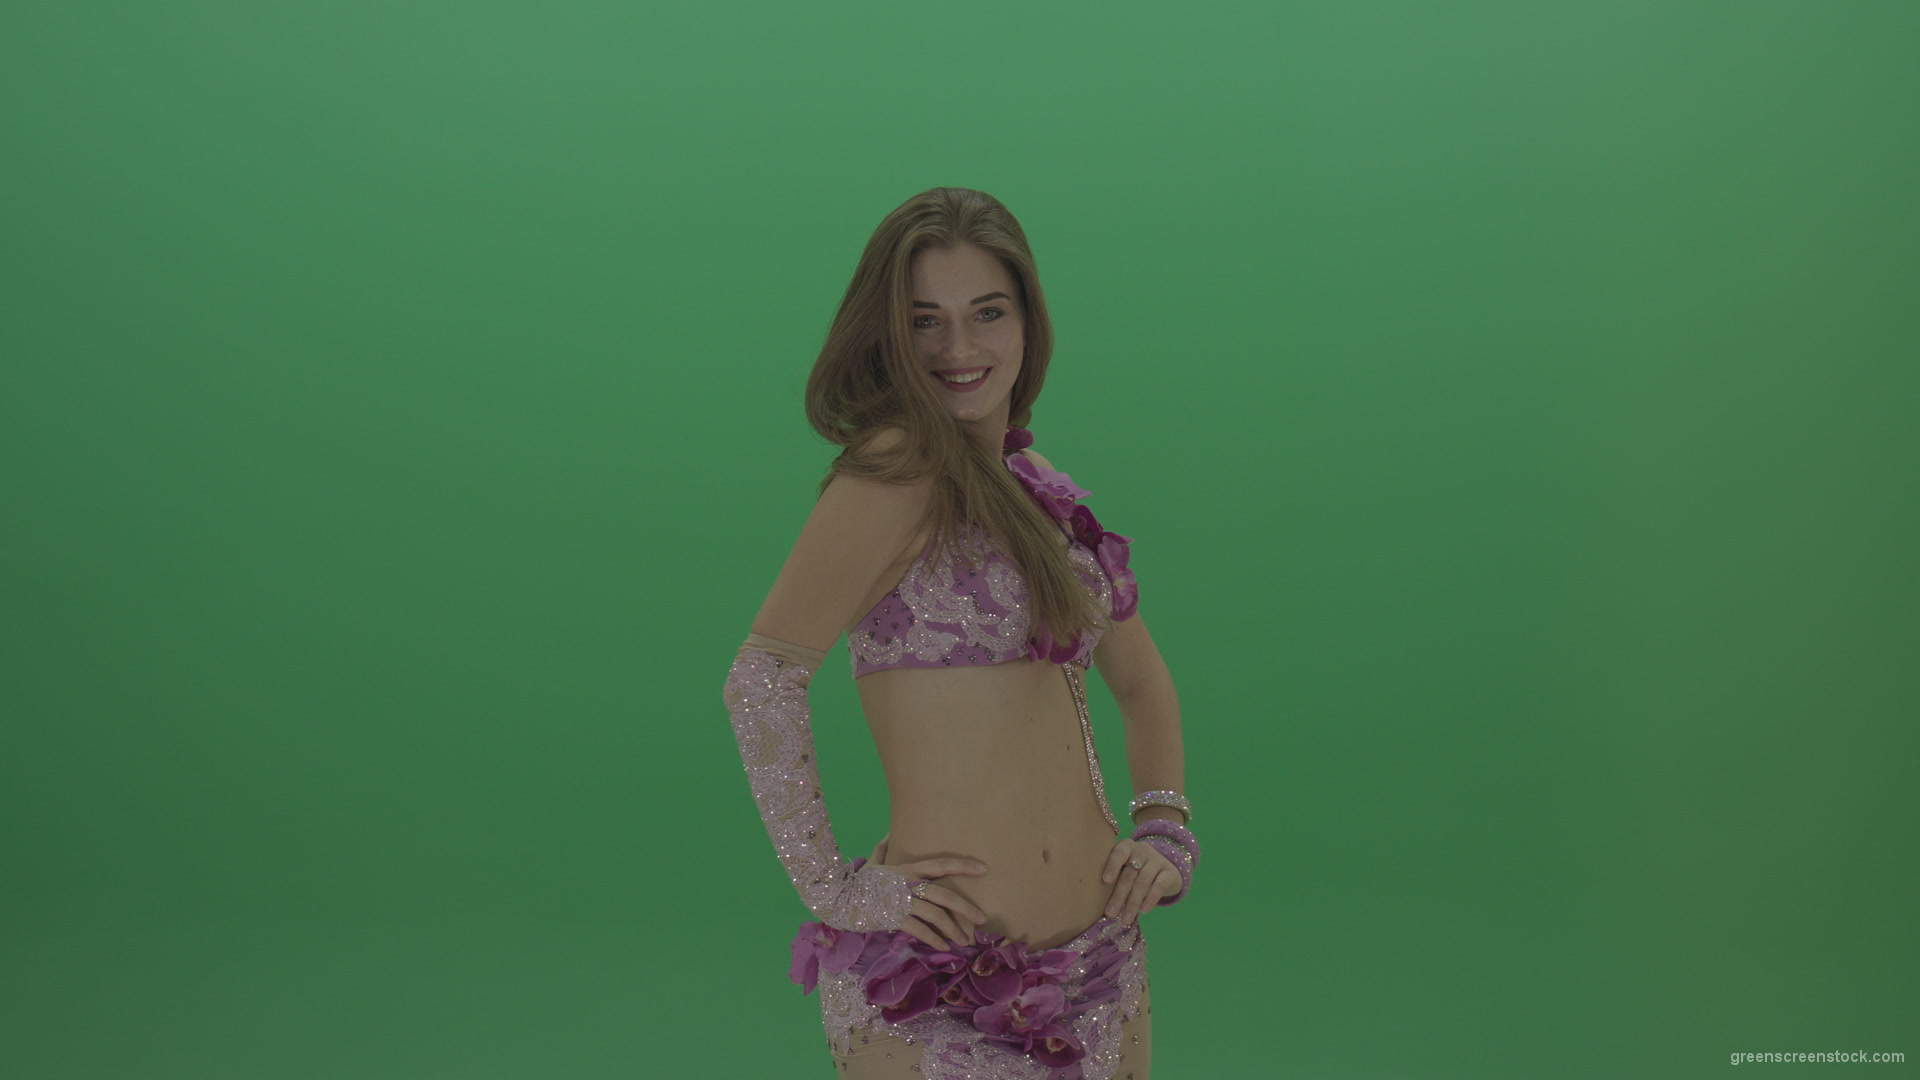 Beautiful-belly-dancer-in-purple-wear-winks-as-she-poses-over-green-screen-background_007 Green Screen Stock